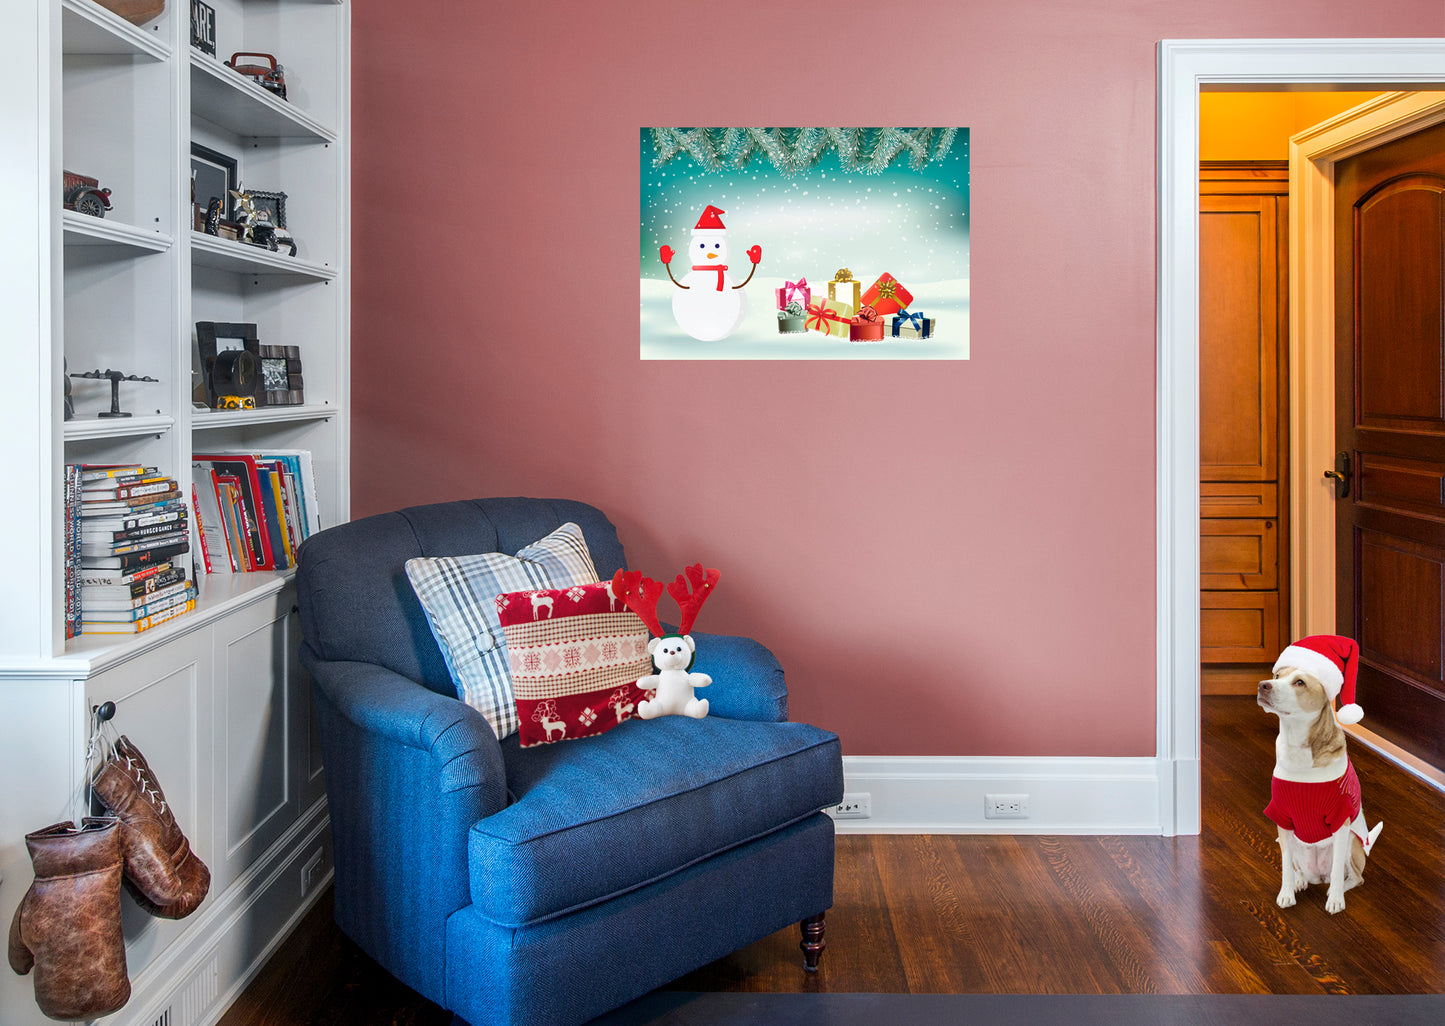 Christmas:  Snowman with Red Mittens Poster        -   Removable     Adhesive Decal